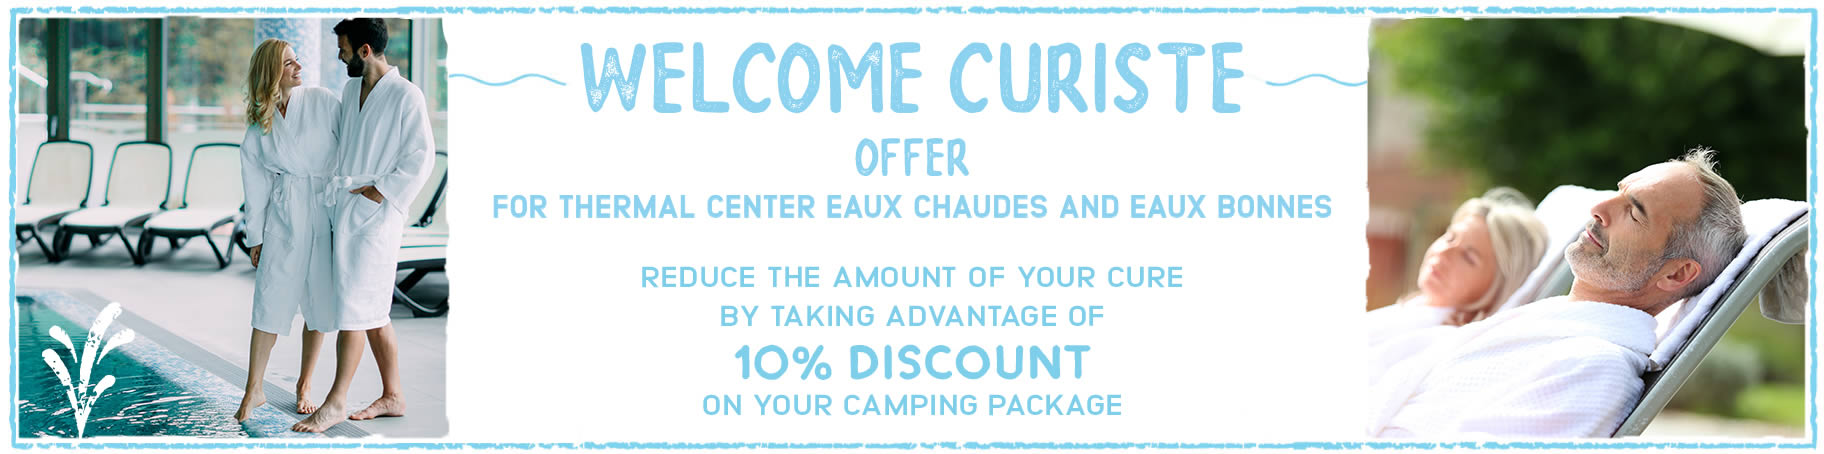 Our welcome curist holiday offer